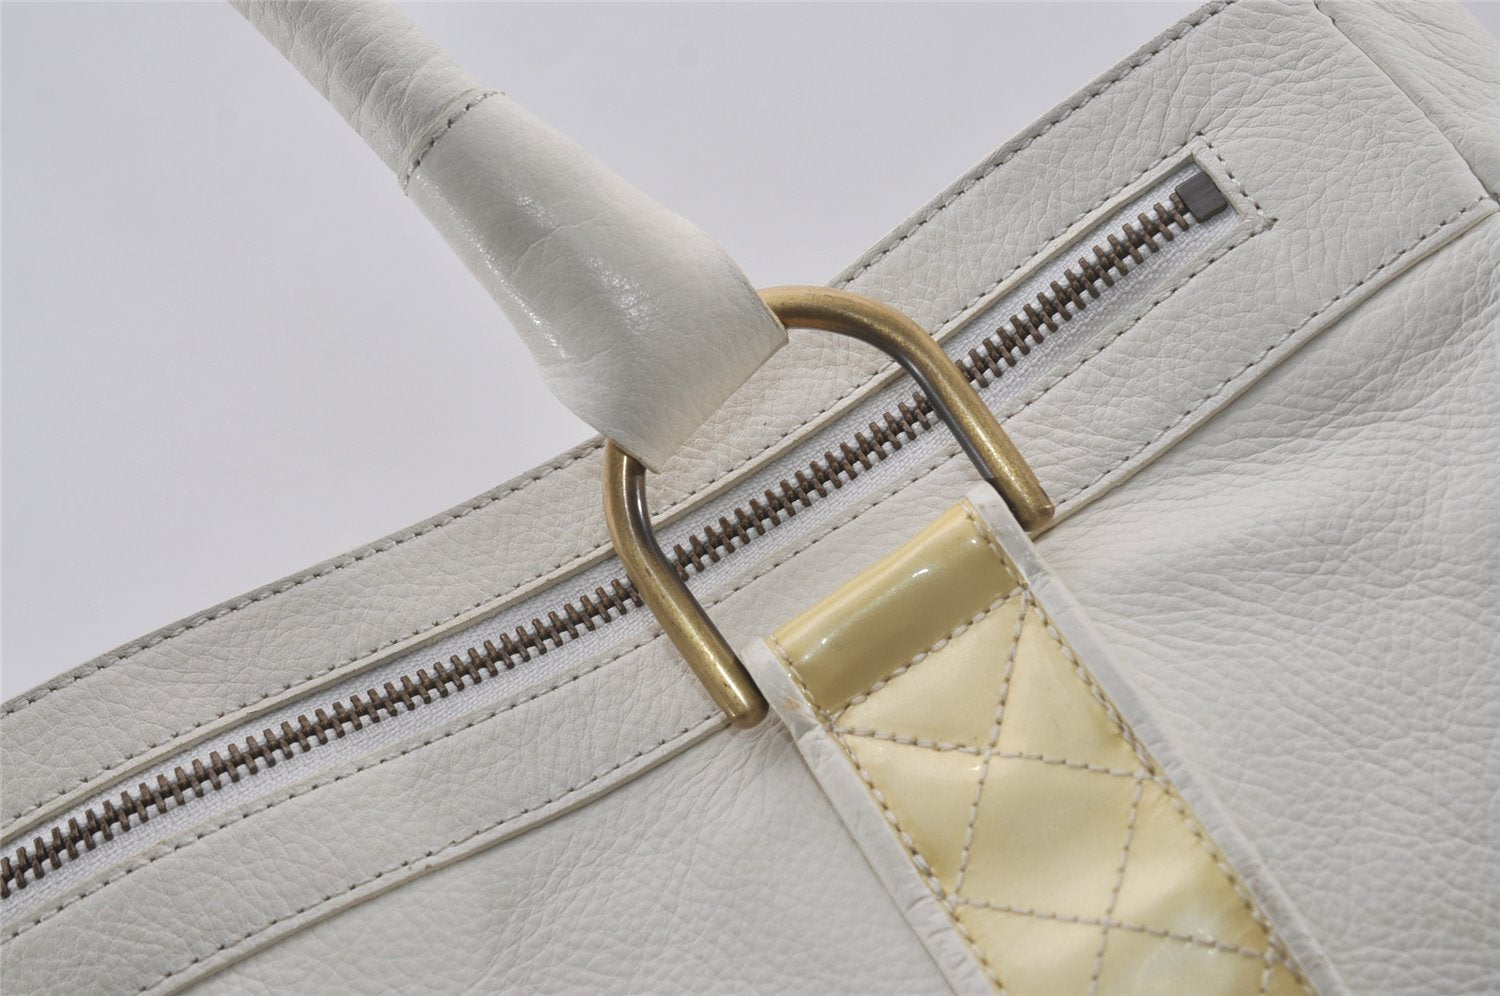 Authentic BURBERRY Vintage Leather Shoulder Tote Bag White 7178I